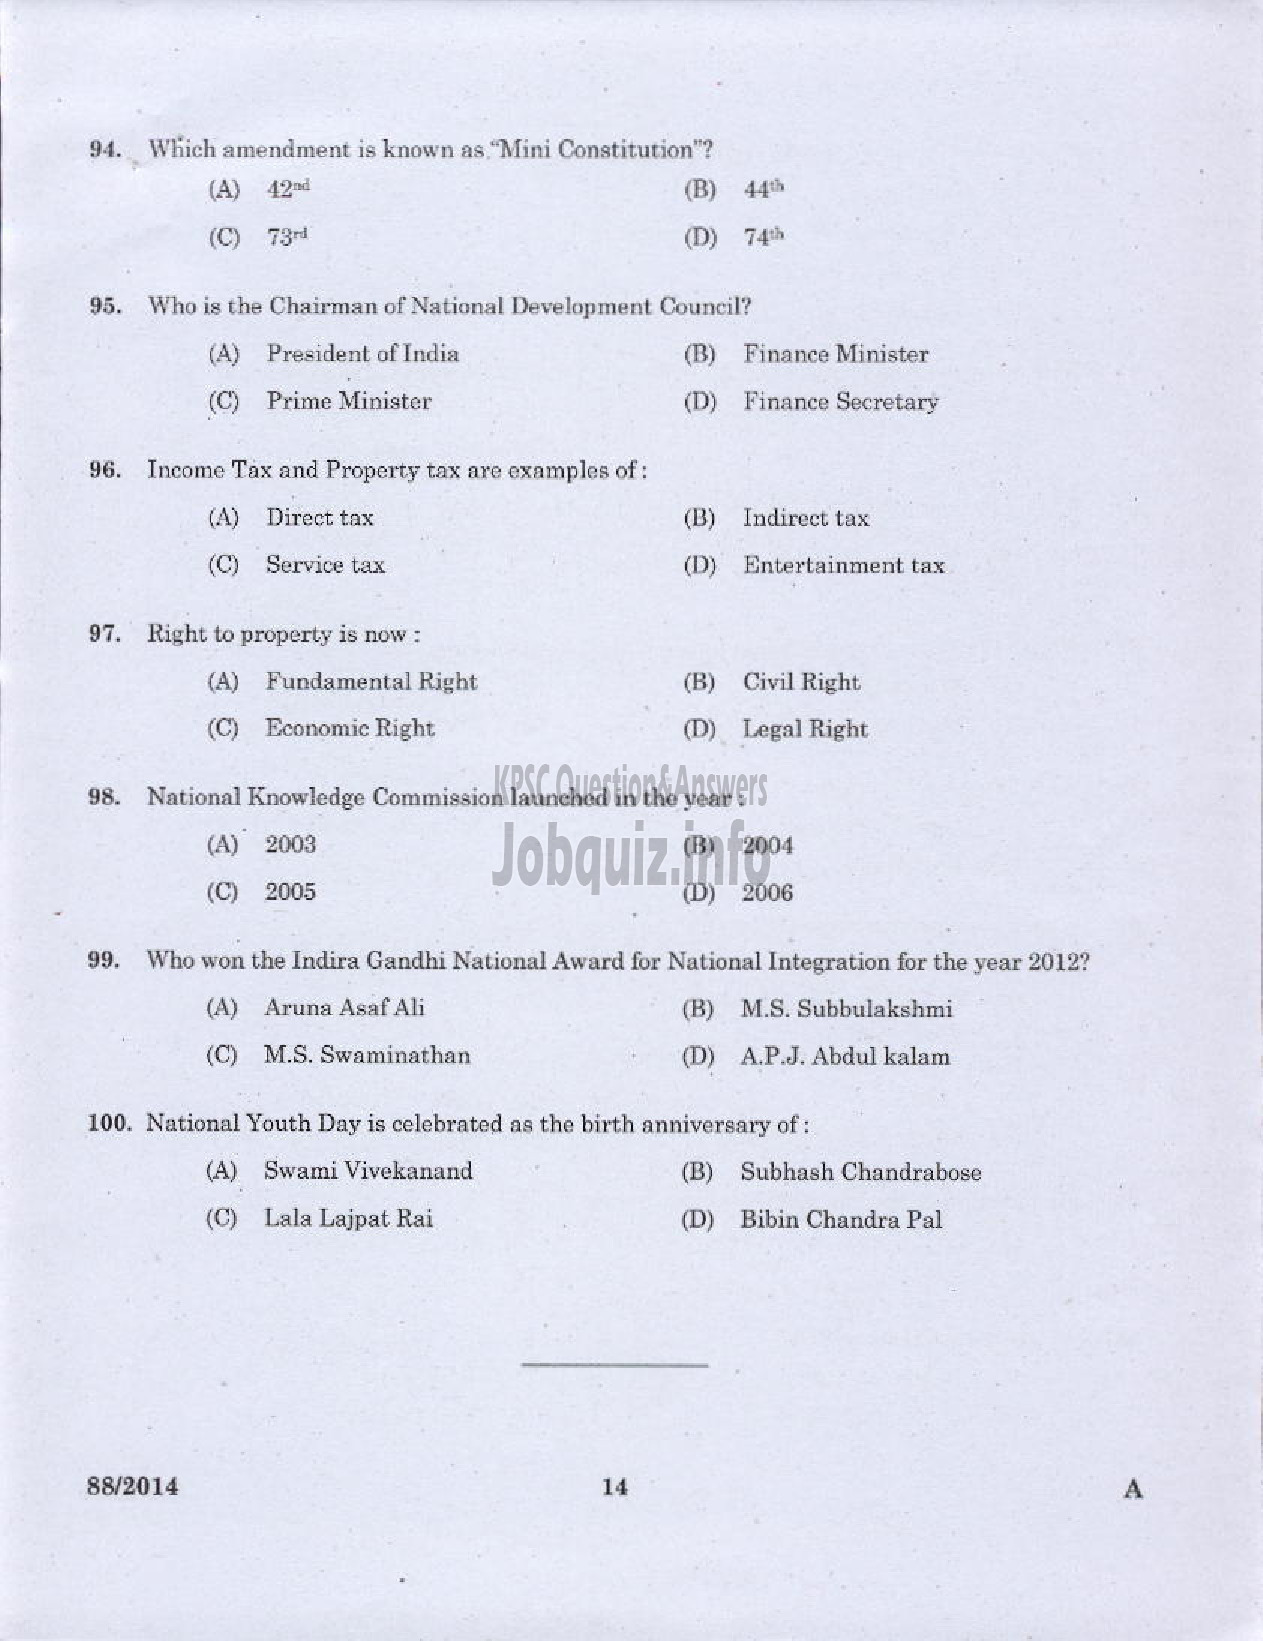 Kerala PSC Question Paper - JUNIOR INSTRUCTOR MECHANICAL CONSUMER ELECTRONICS INDUSTRIAL TRAINING DEPARTMENT-12